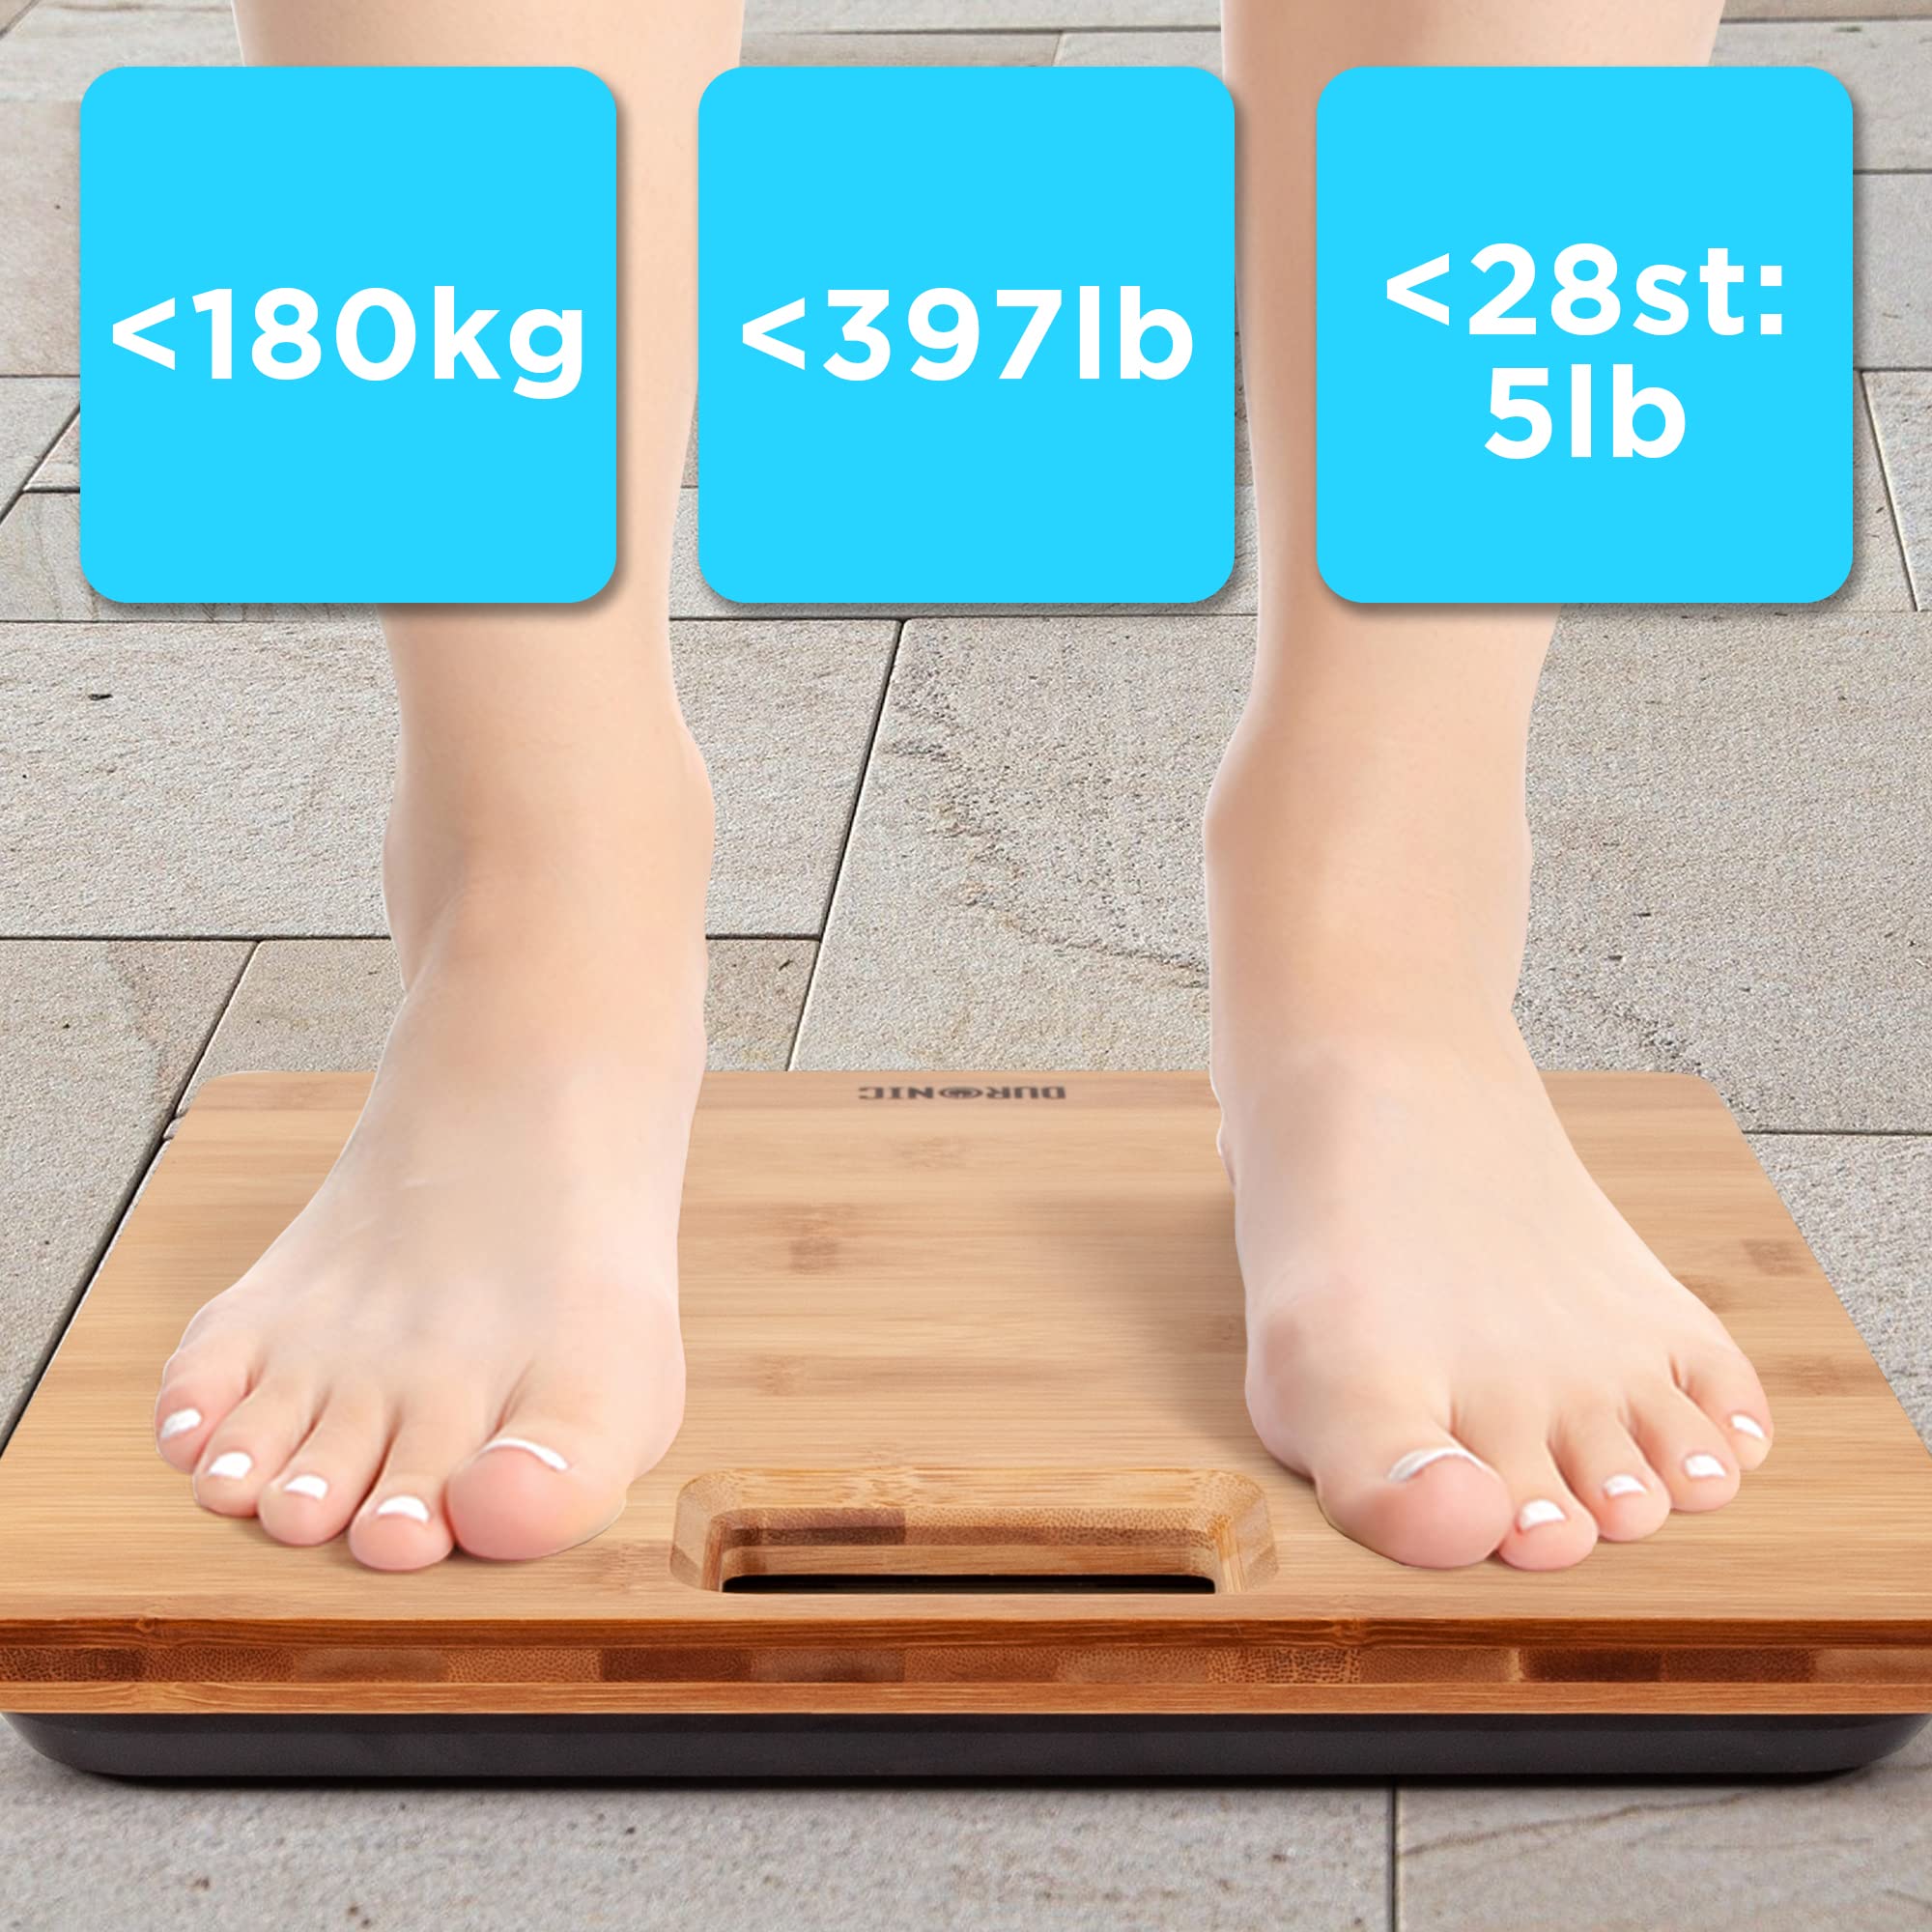 Duronic Digital Bathroom Scales BS504 Body Weight Weighing Scales Stone lb kg High Precision Sensors 180kg Capacity Eco-Friendly Bamboo Design